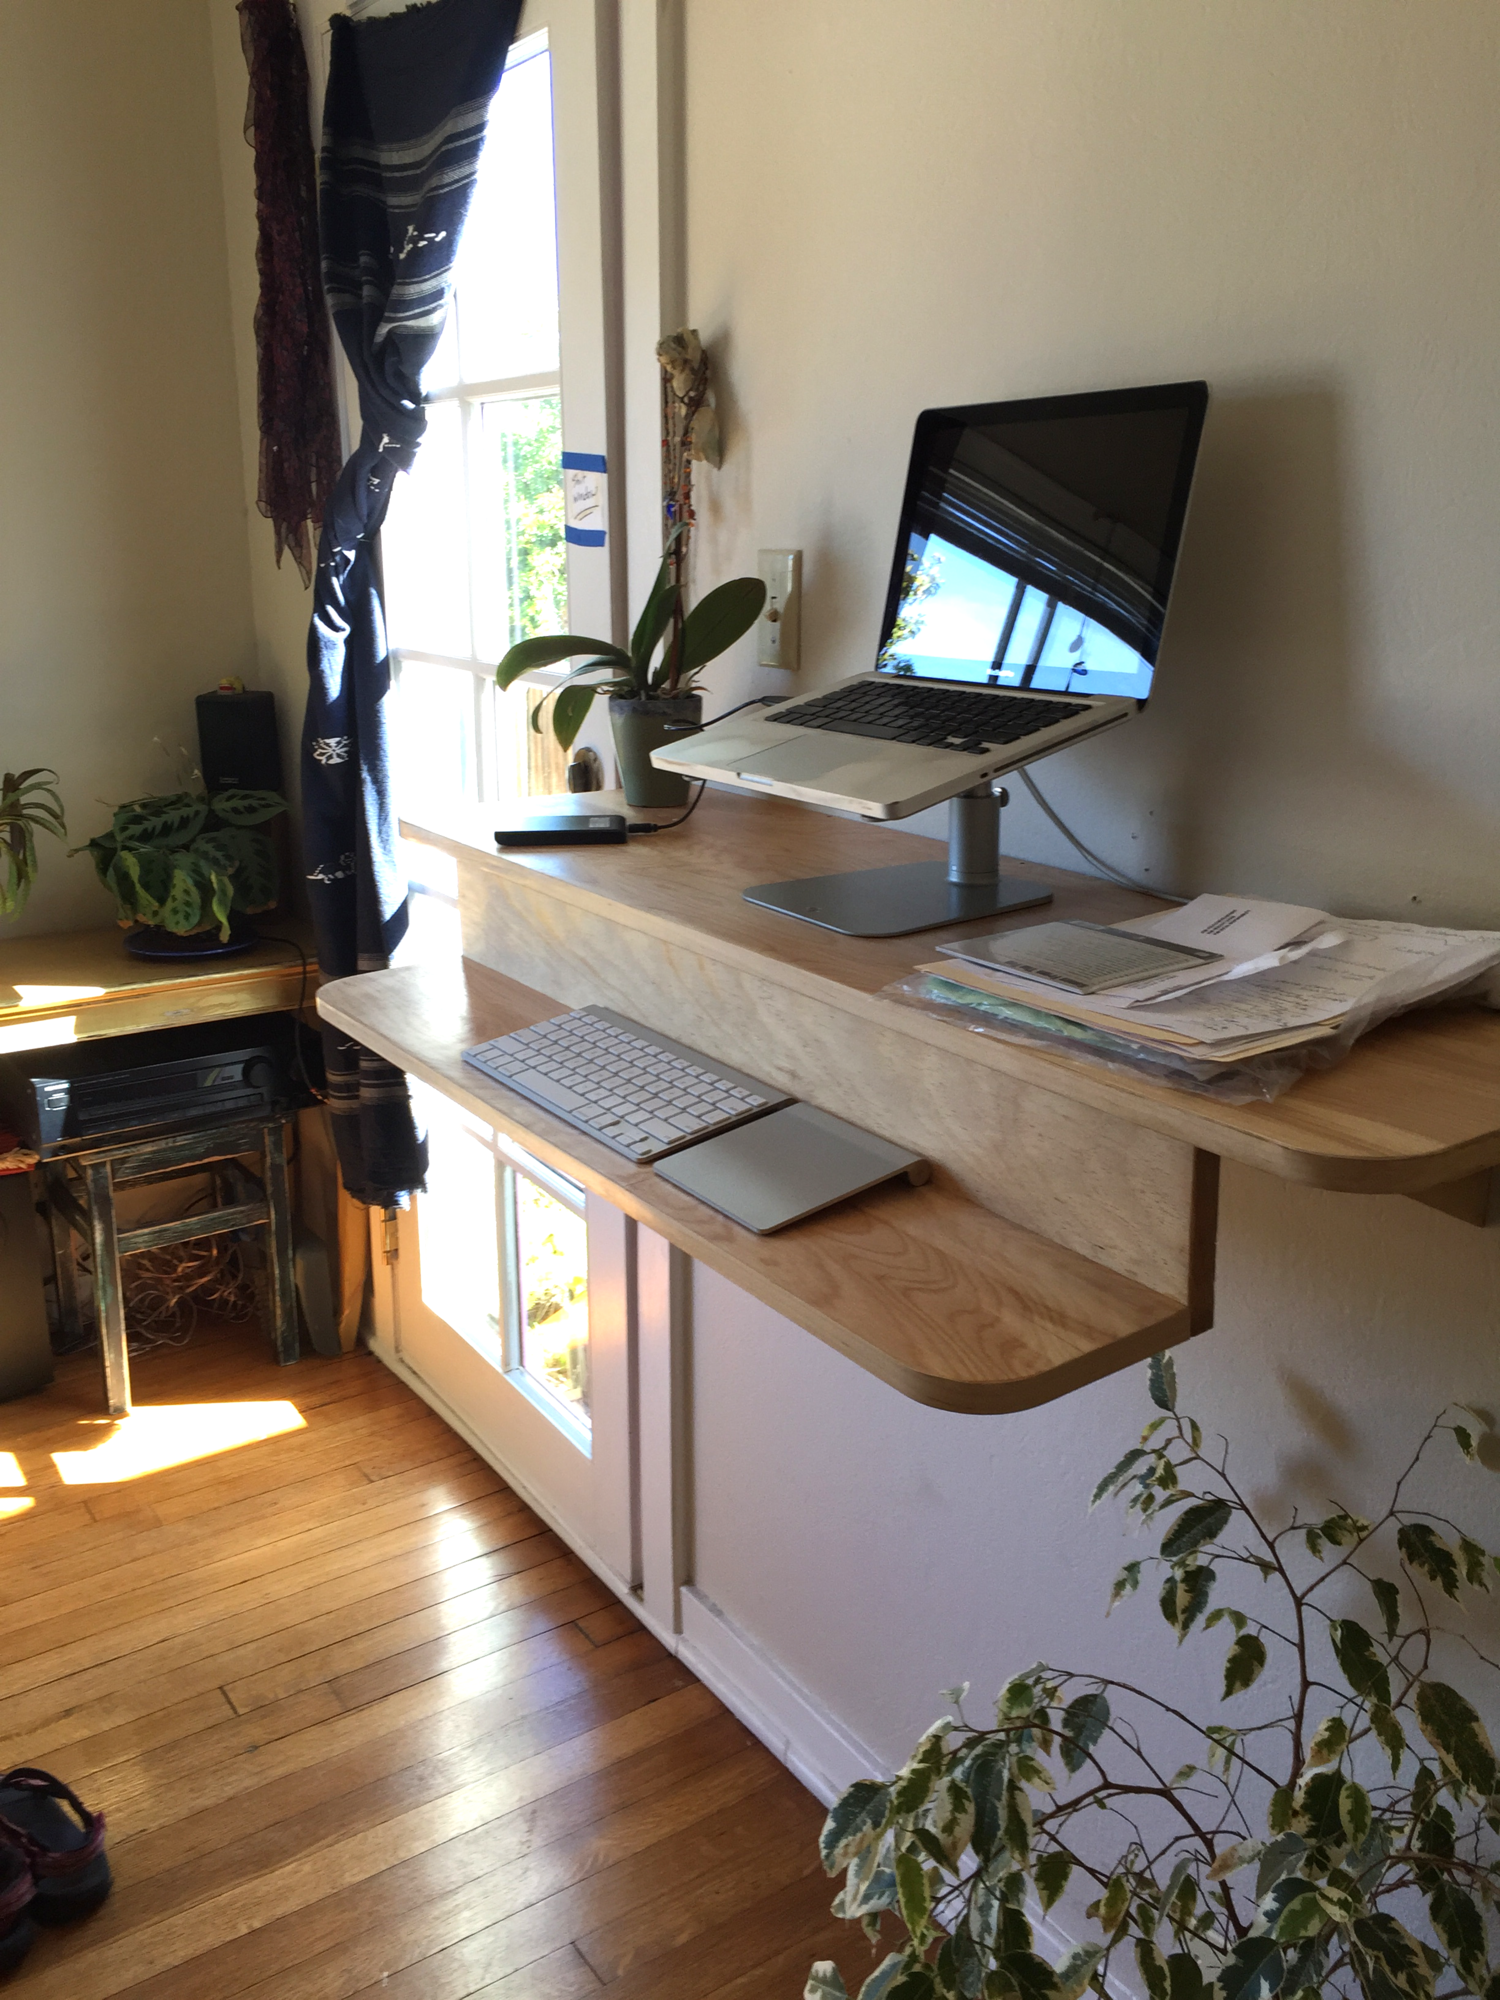 The Benefits of Using a Standing Desk